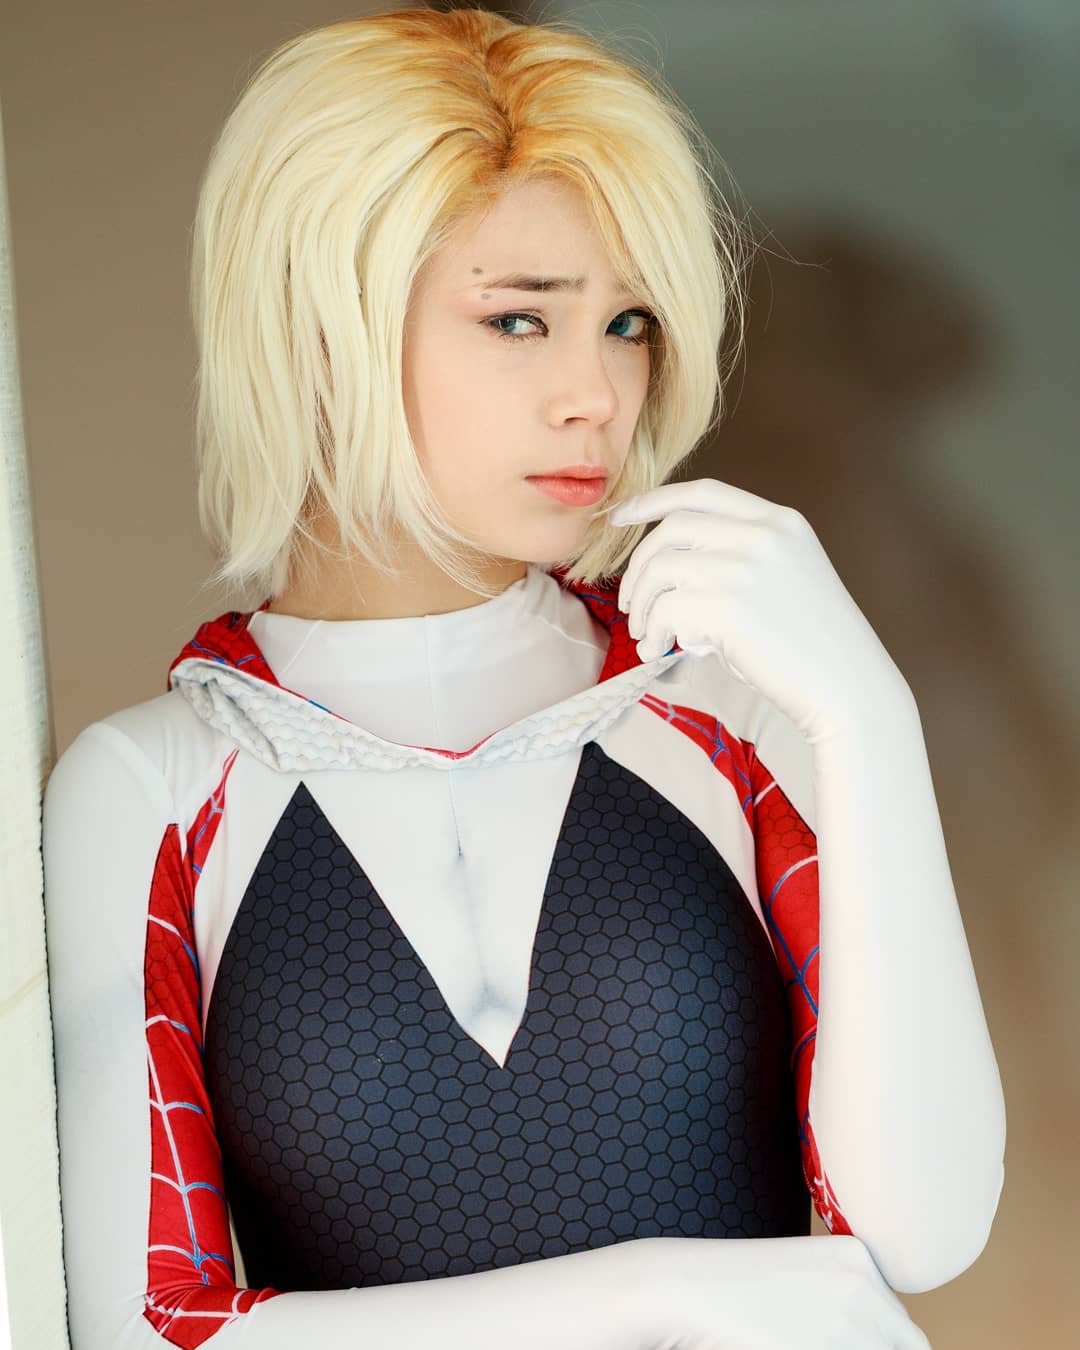 Why didn’t you take the day off. 😱 Stay safe everyone. Character descriptions will be missing and cosplayers on que. Enjoy. 👘: @cl0udtea
📸: @foreverbluedigital
#otakon2019 #spiderwomen #gwenstacy